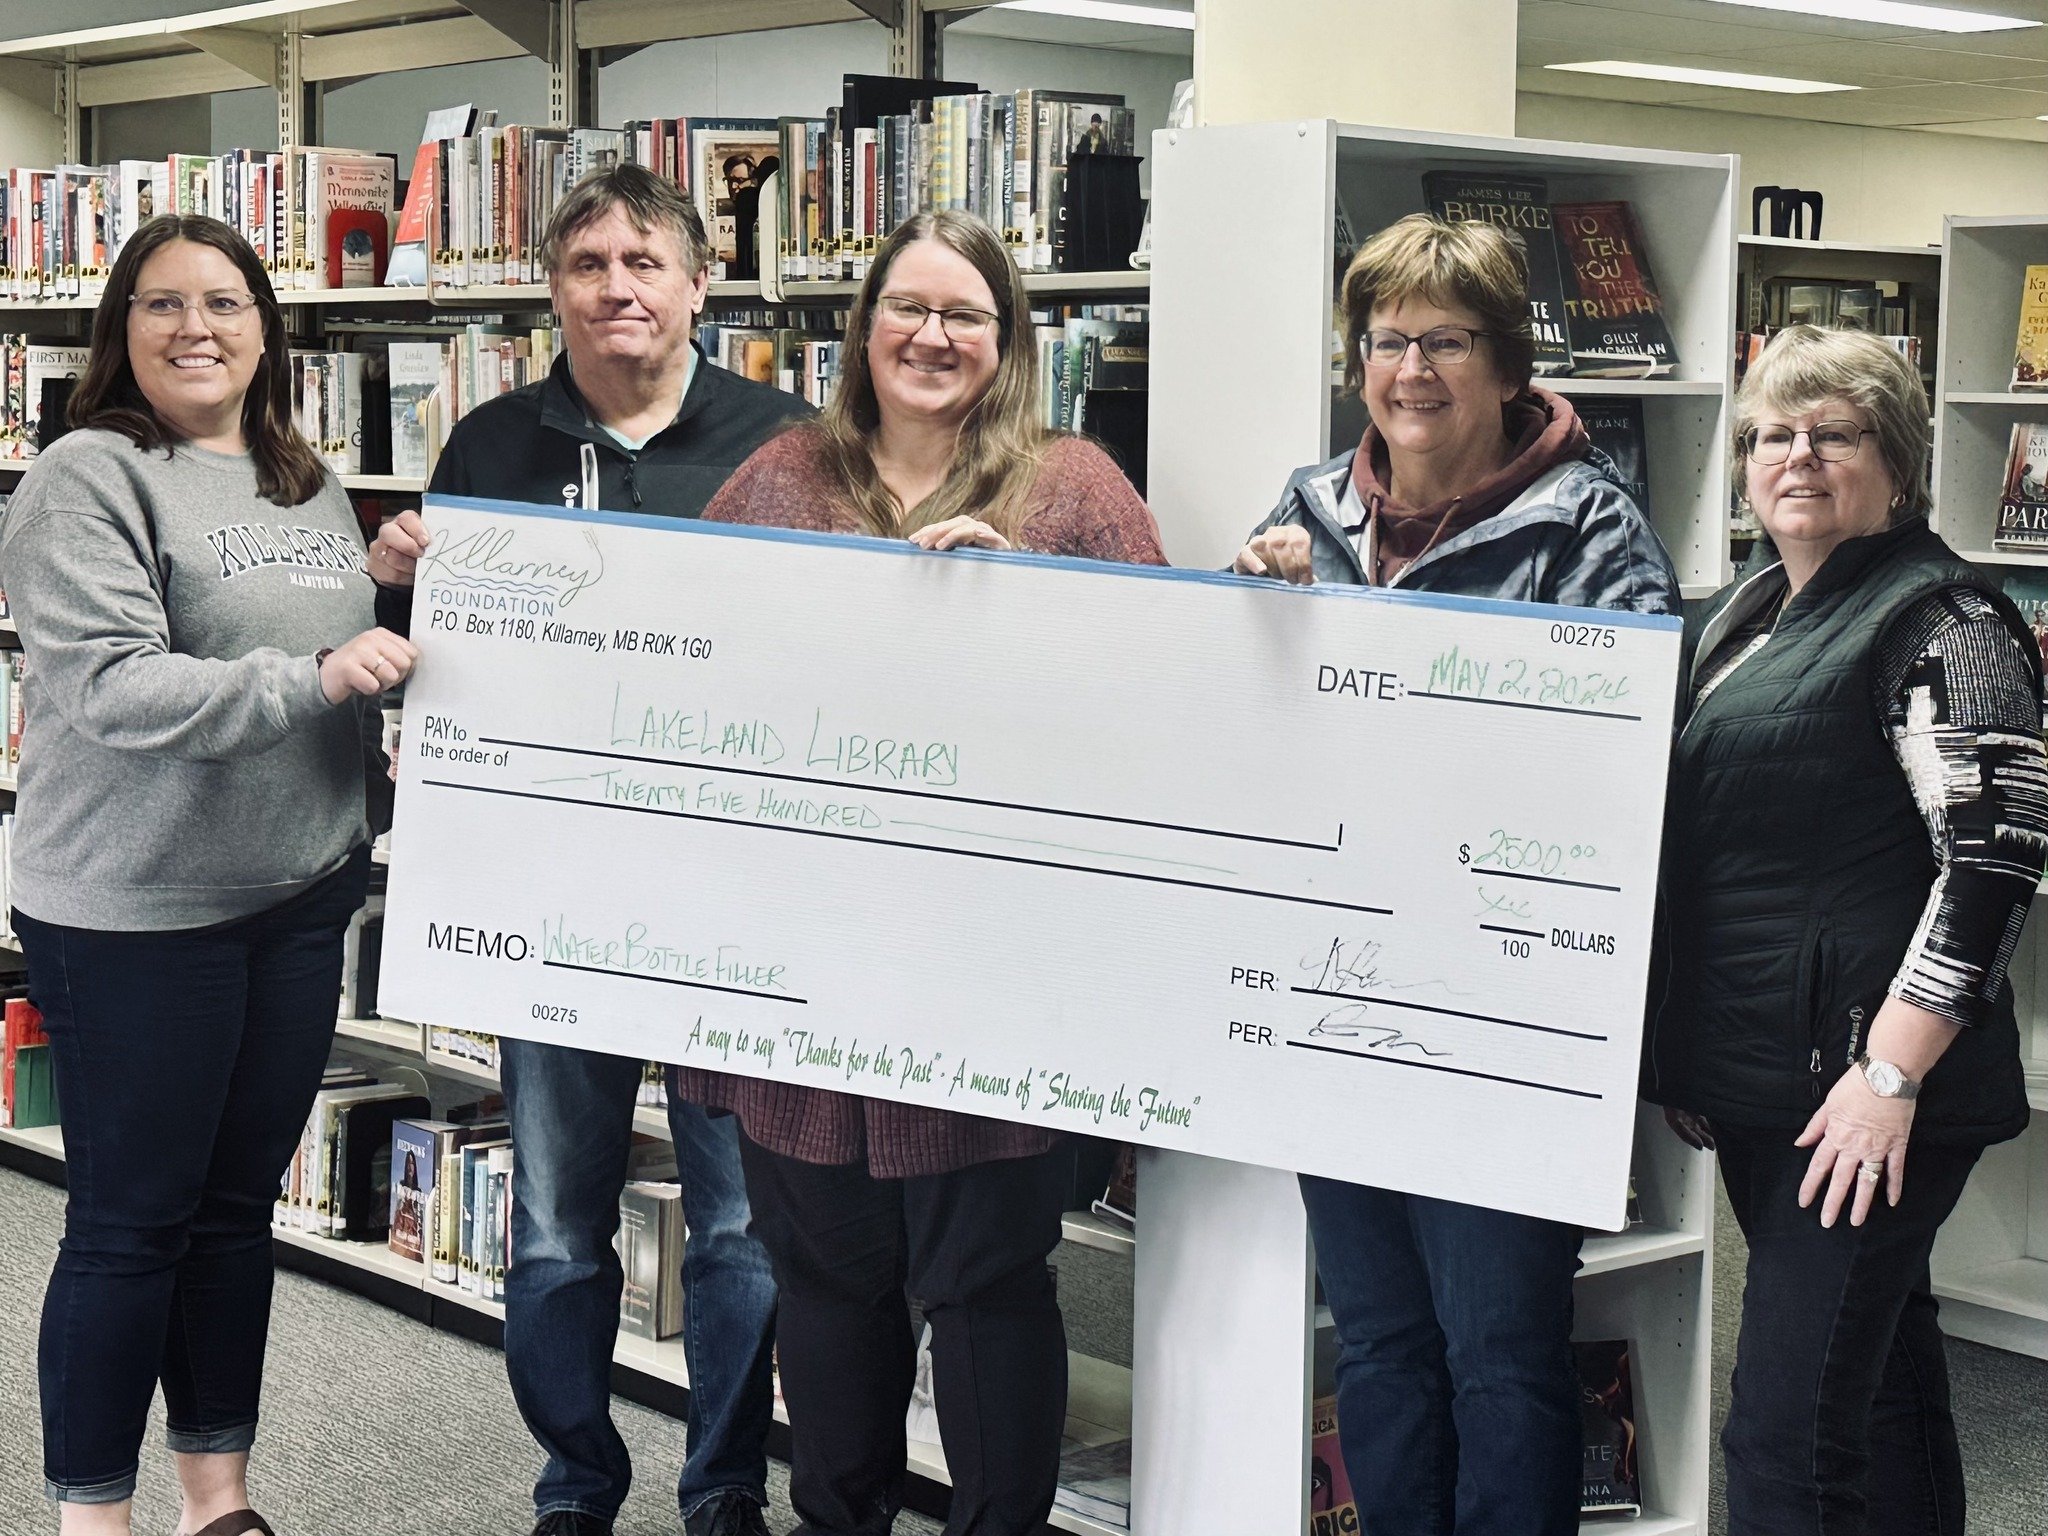 A heartfelt thank-you to The Killarney Foundation for their ongoing support of Lakeland Regional Library! 🥰🥰Their support this spring will allow us to add a water bottle refill station to our library!!